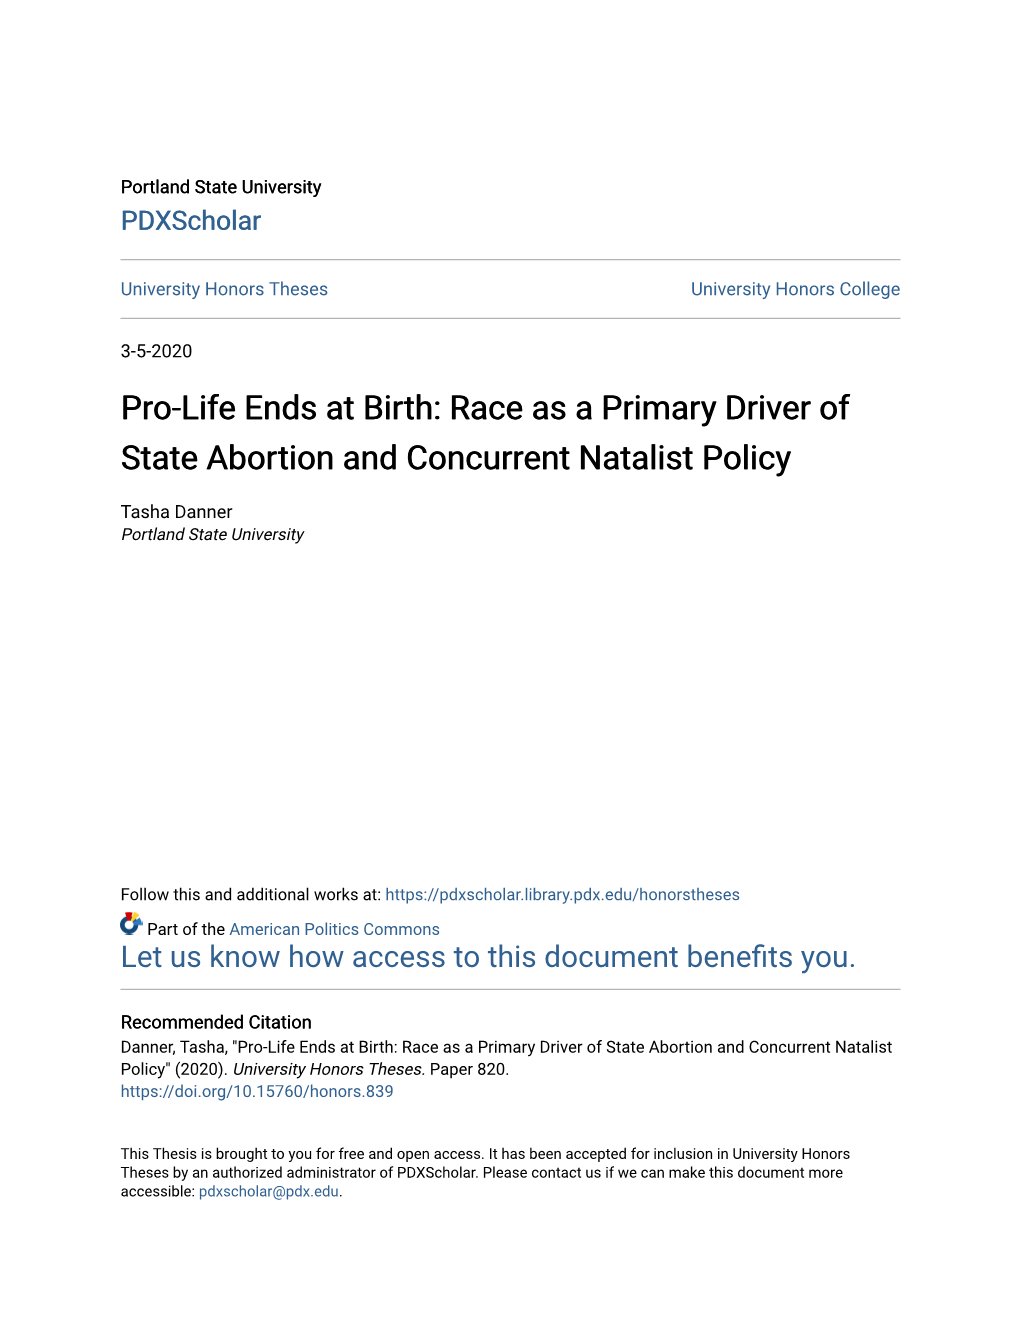 Pro-Life Ends at Birth: Race As a Primary Driver of State Abortion and Concurrent Natalist Policy